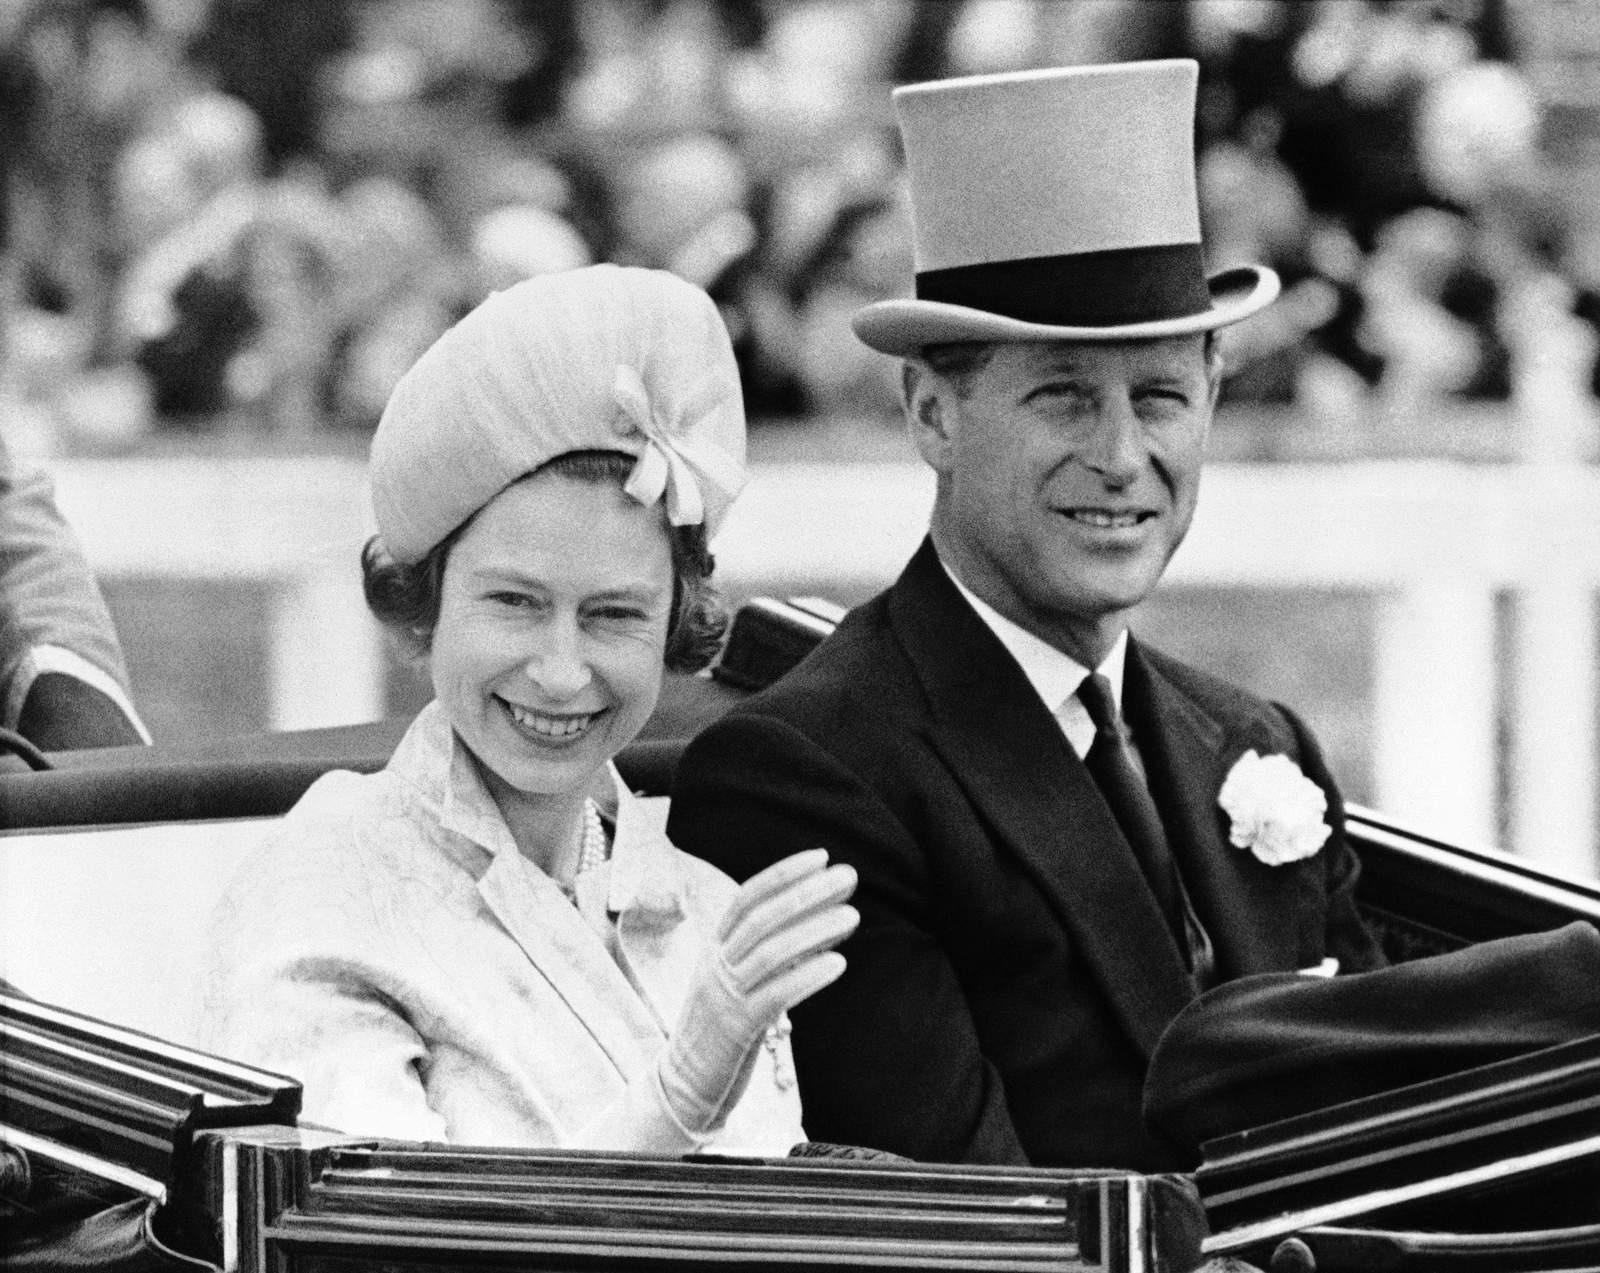 Consorts, past and future, in Britain’s changing monarchy